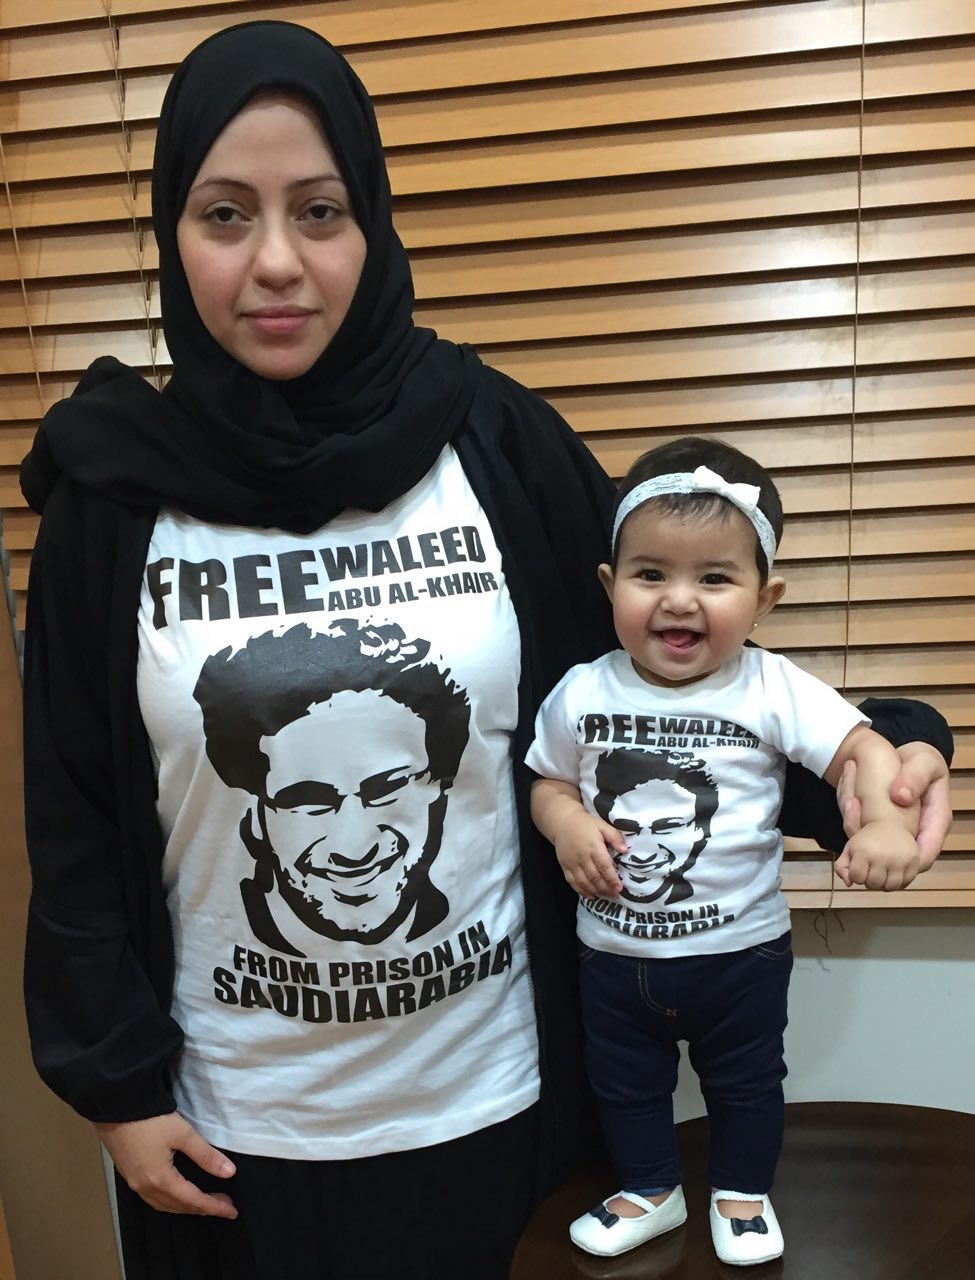 Saudi Arabia: Two more women human rights activists arrested in unrelenting crackdown